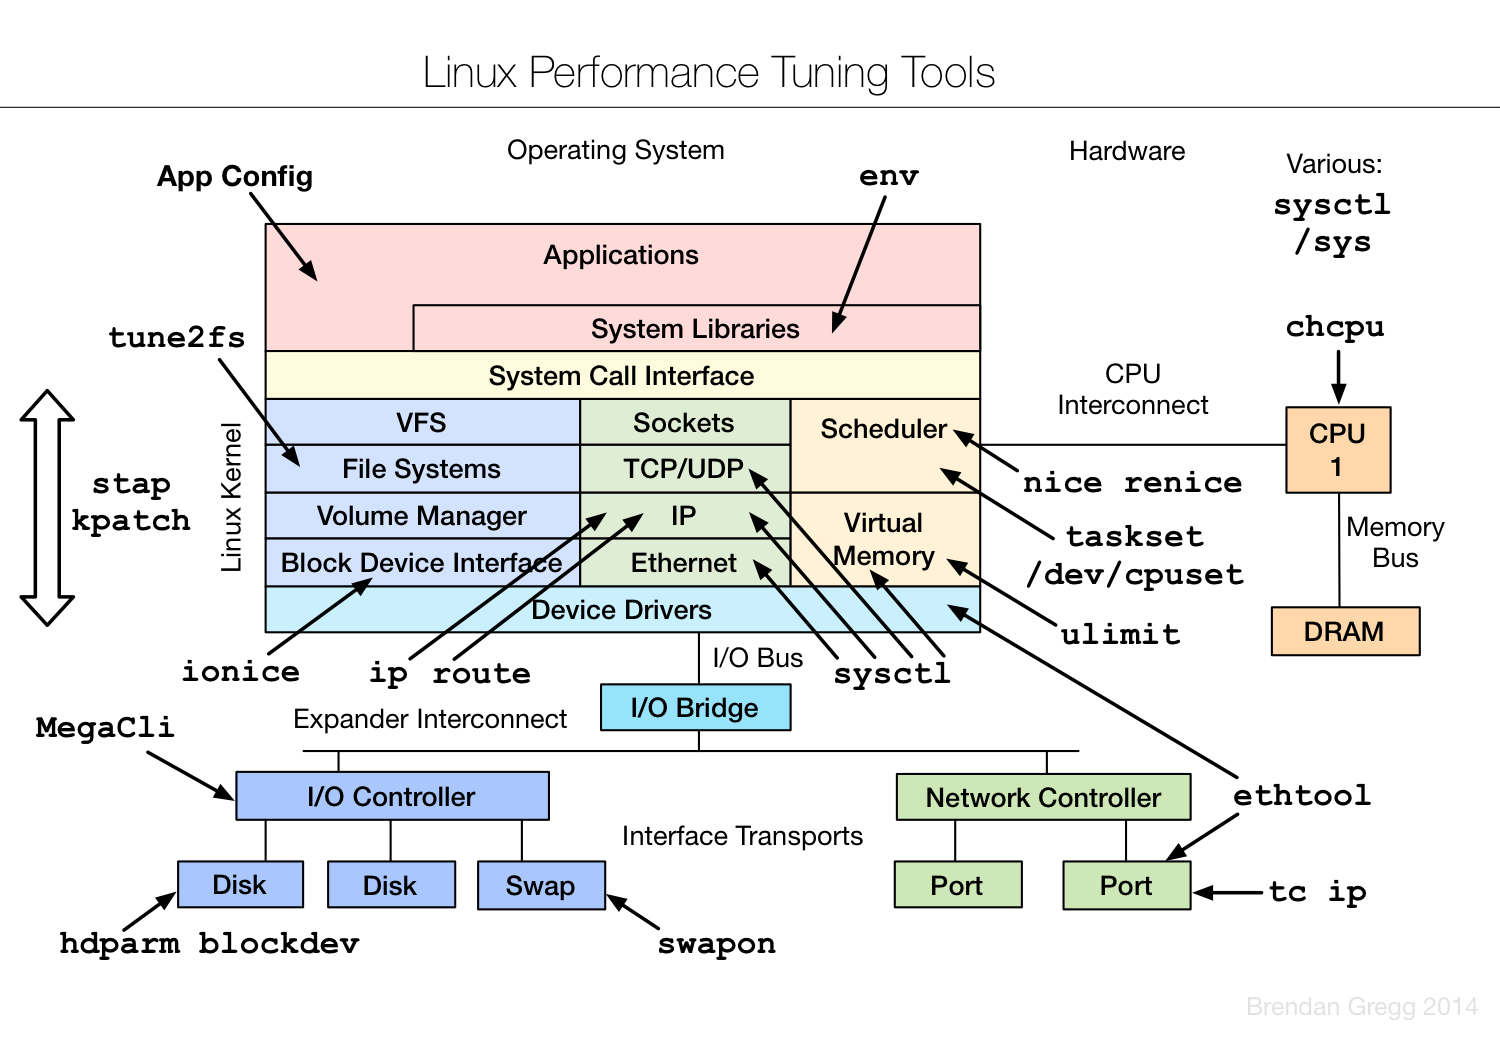 linux_tuning_tools.png